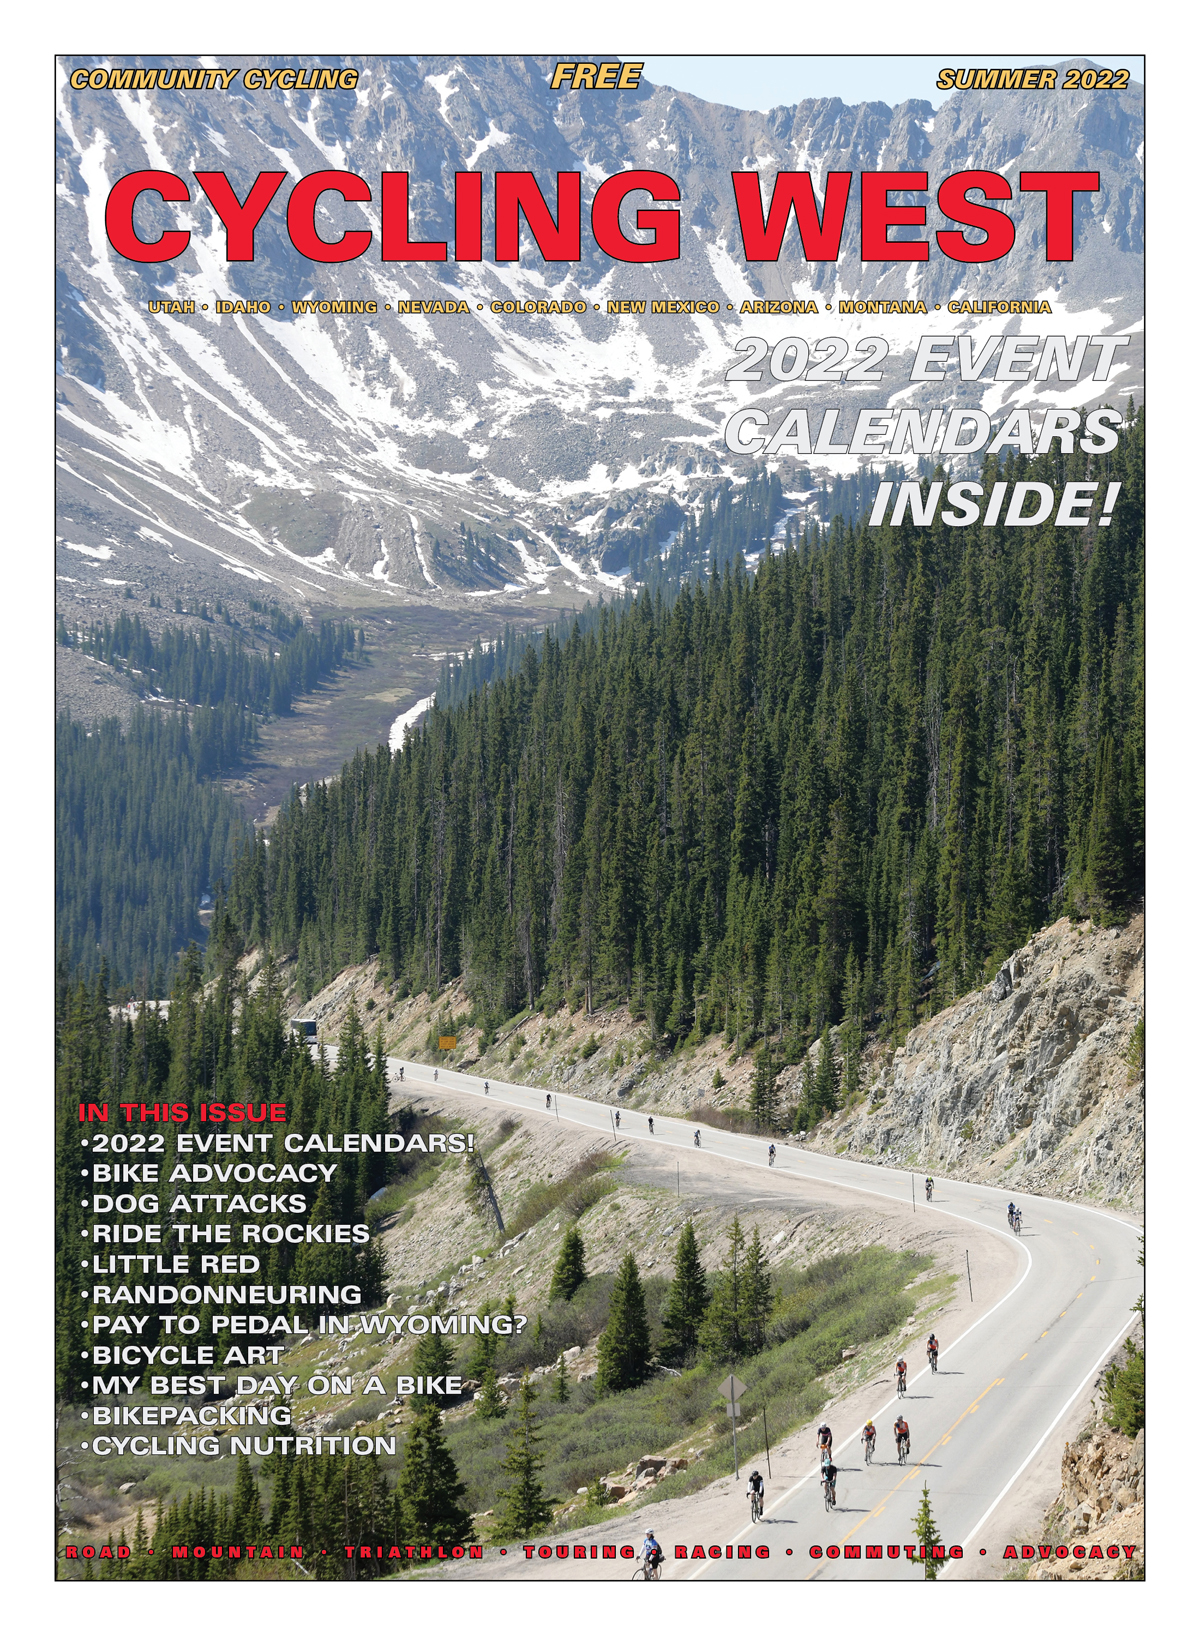 Cycling West Summer 2022 Cover Photo: Riders on Loveland Pass in the 2022 Ride the Rockies. Photo by Ryan Muncy Photography, https://ryanmuncyphotography.smugmug.com. Follow him on Instagram @ryanmuncy